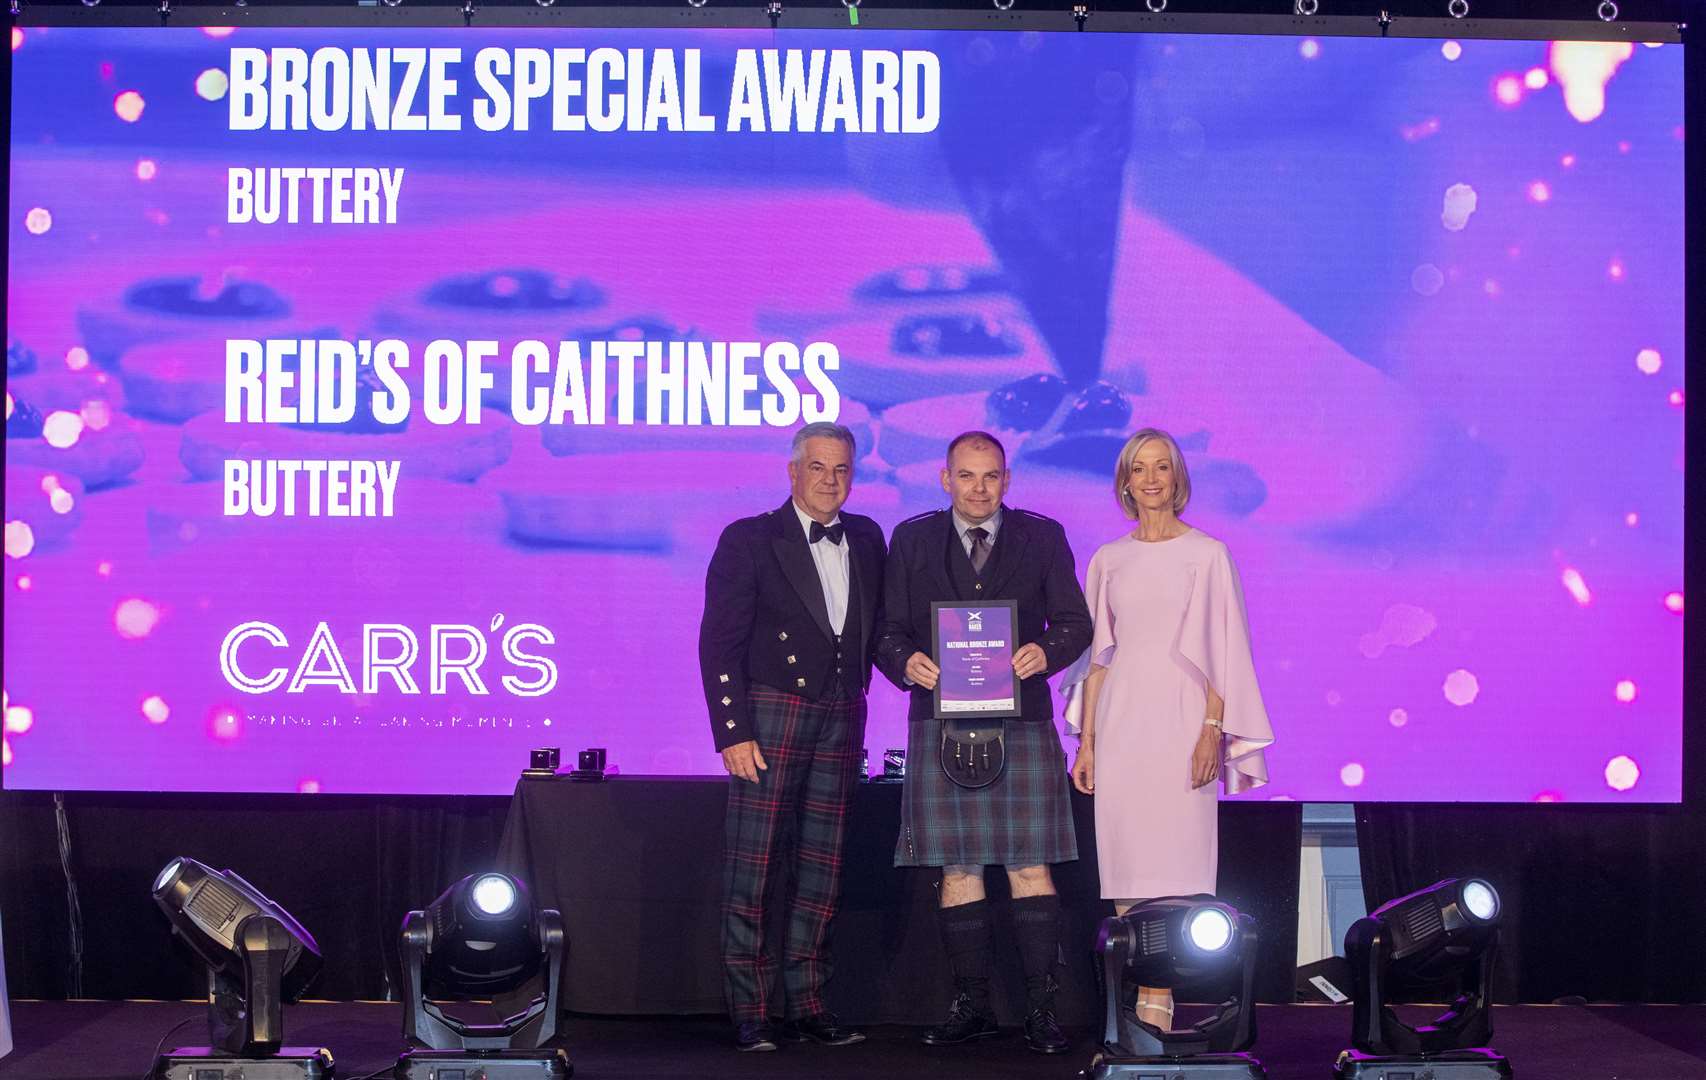 Gary Reid (centre) receiving the bronze special award in the buttery category, alongside Alan Burns of Carrs Flour and competition host and industry specialist Mich Turner MBE.